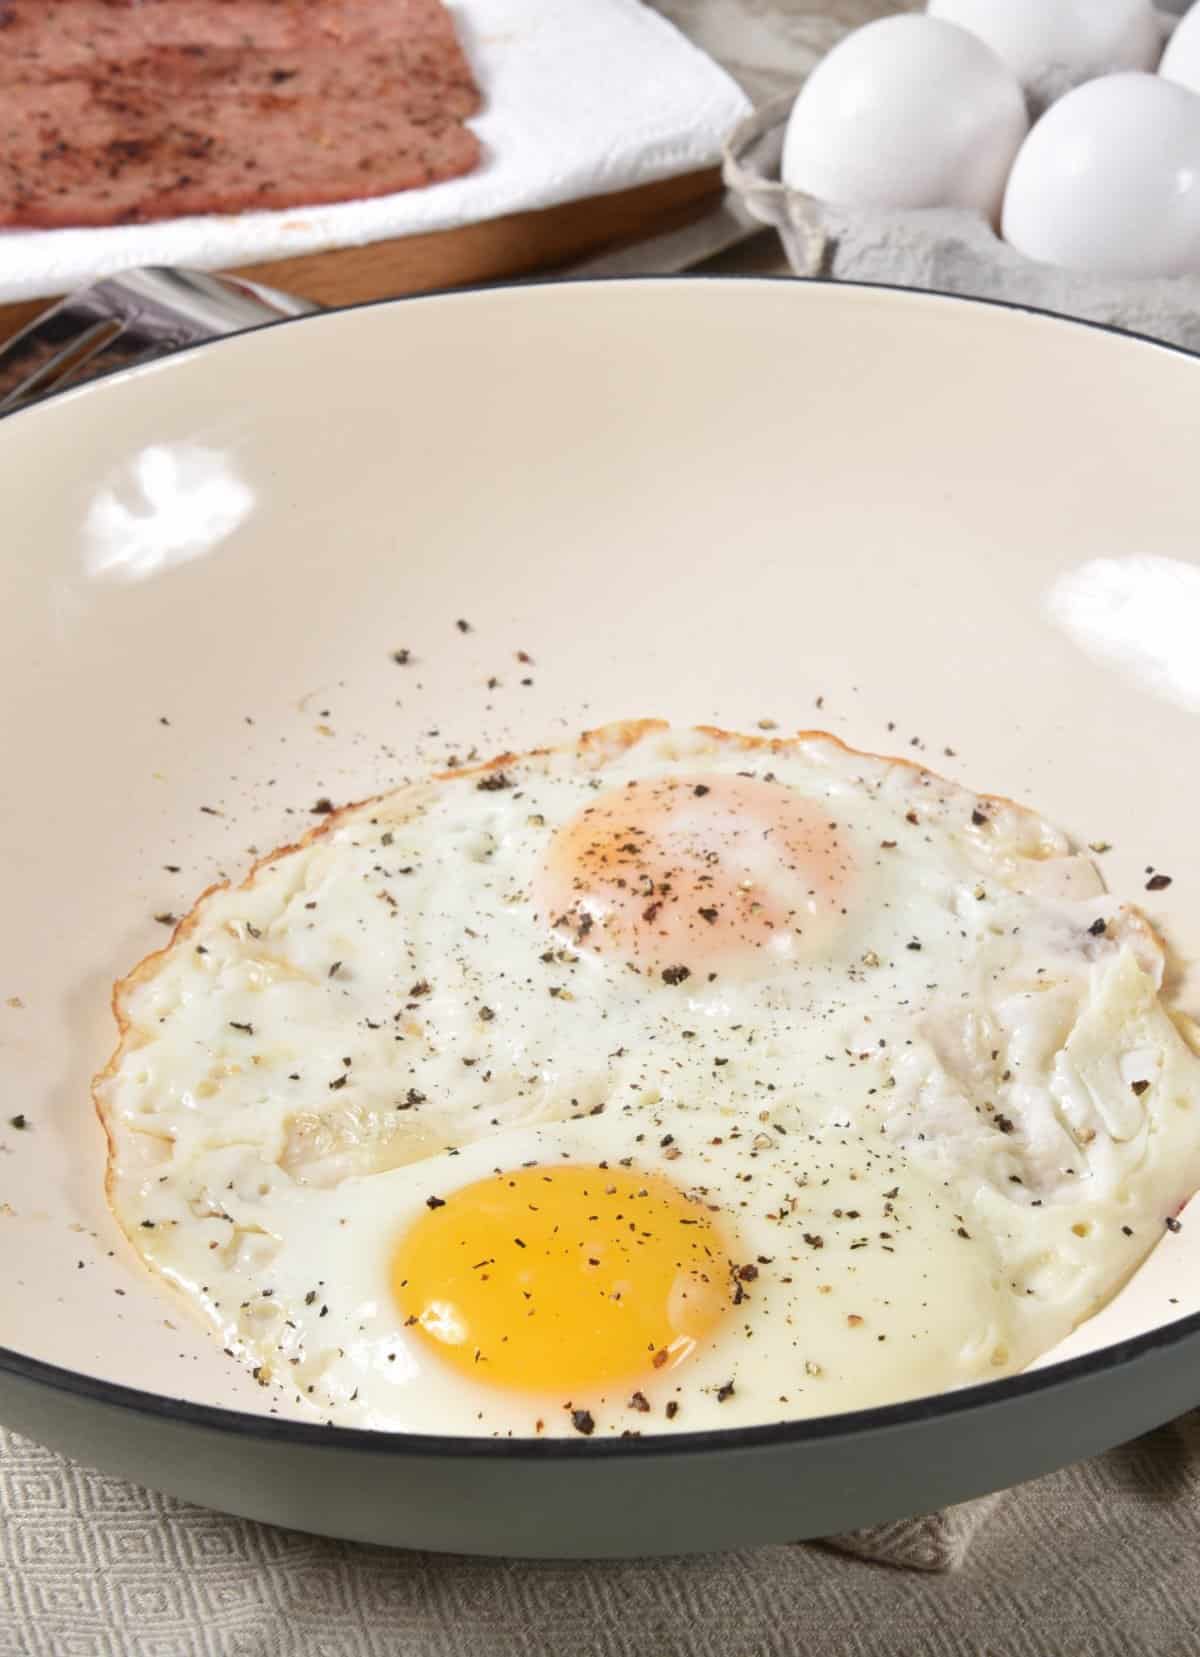 two fried eggs in a pan